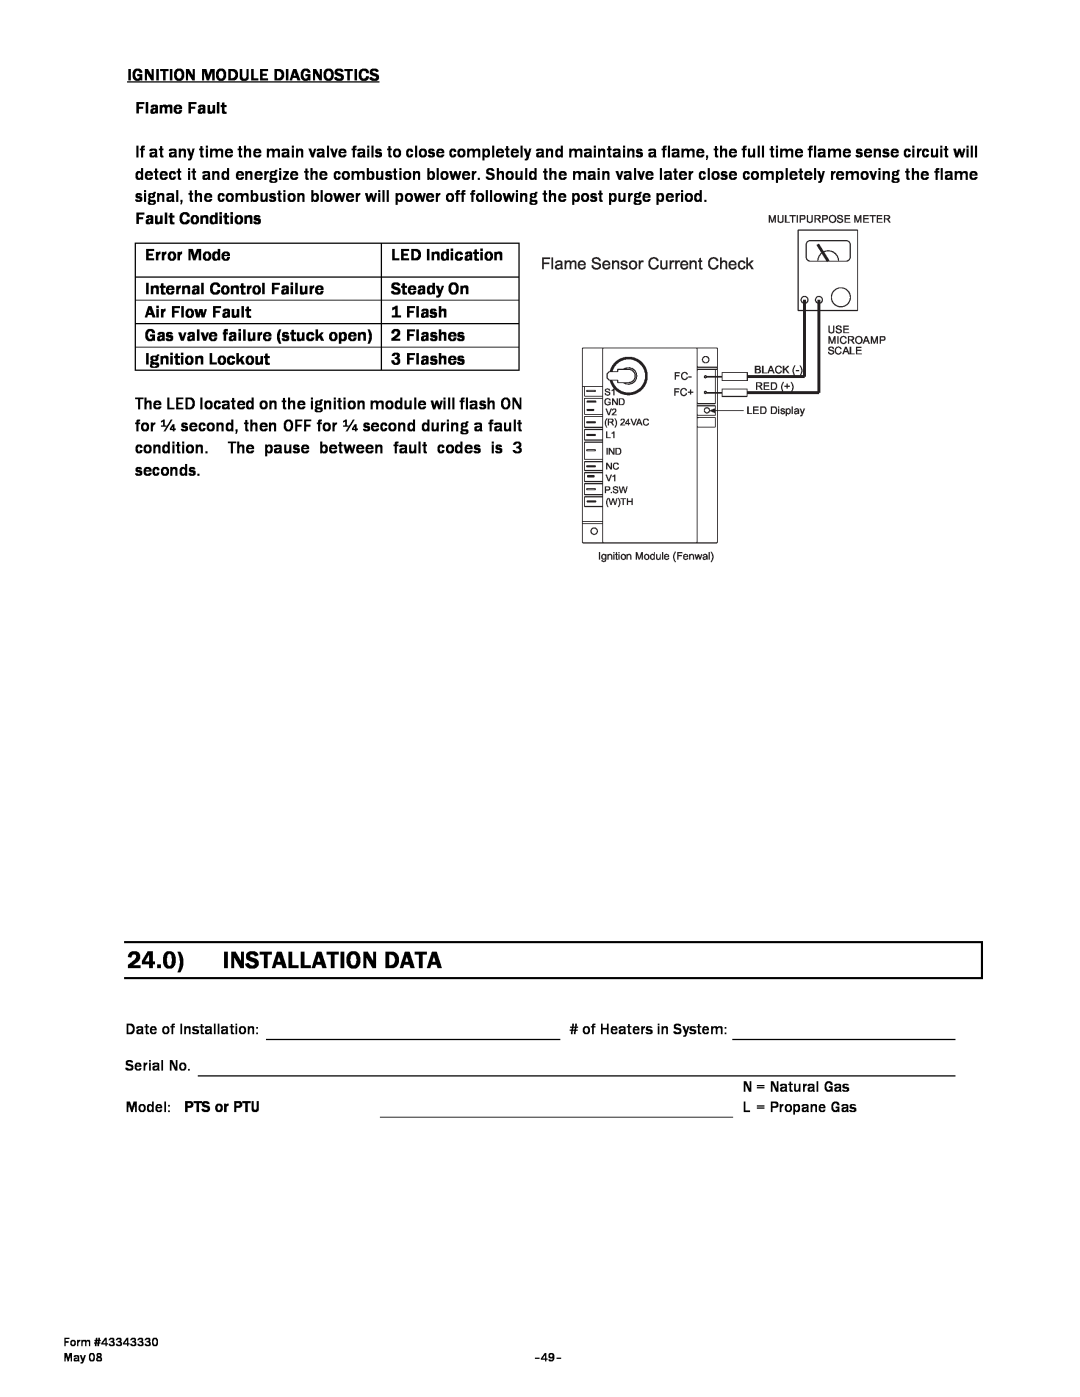 Gas-Fired Products PTS Series, PTU Series manual 24.0, Installation Data 